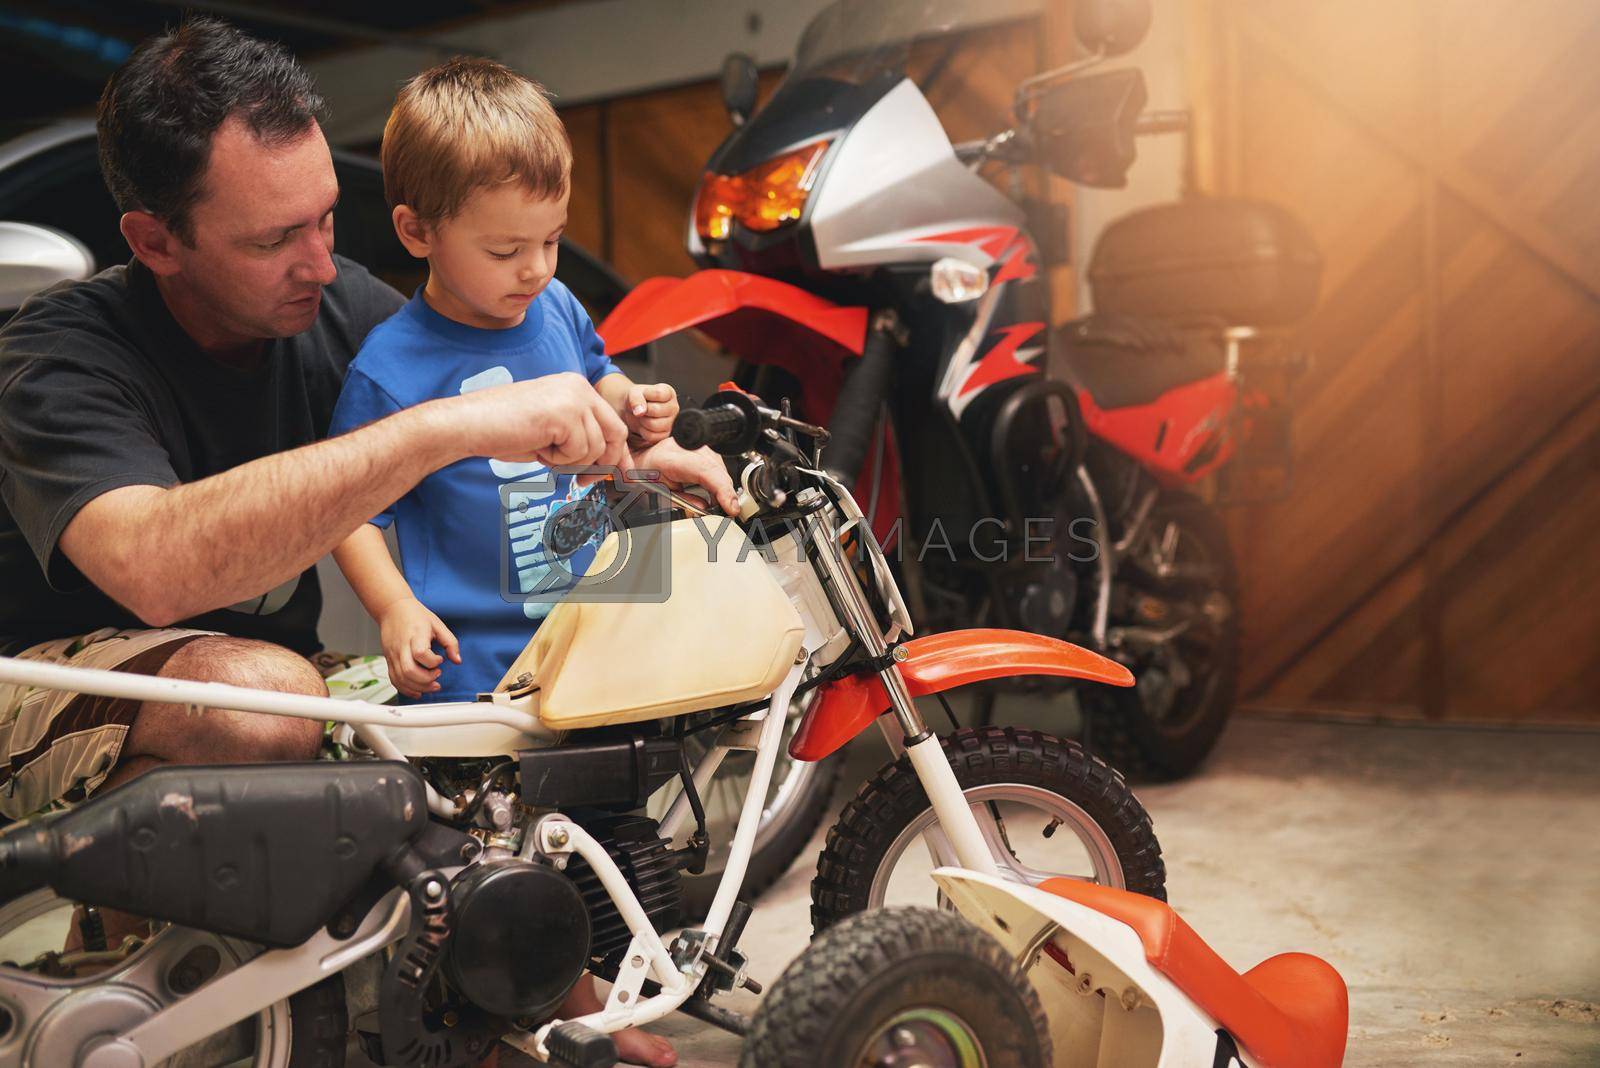 Shot of a father and son fixing a bike in a garage.